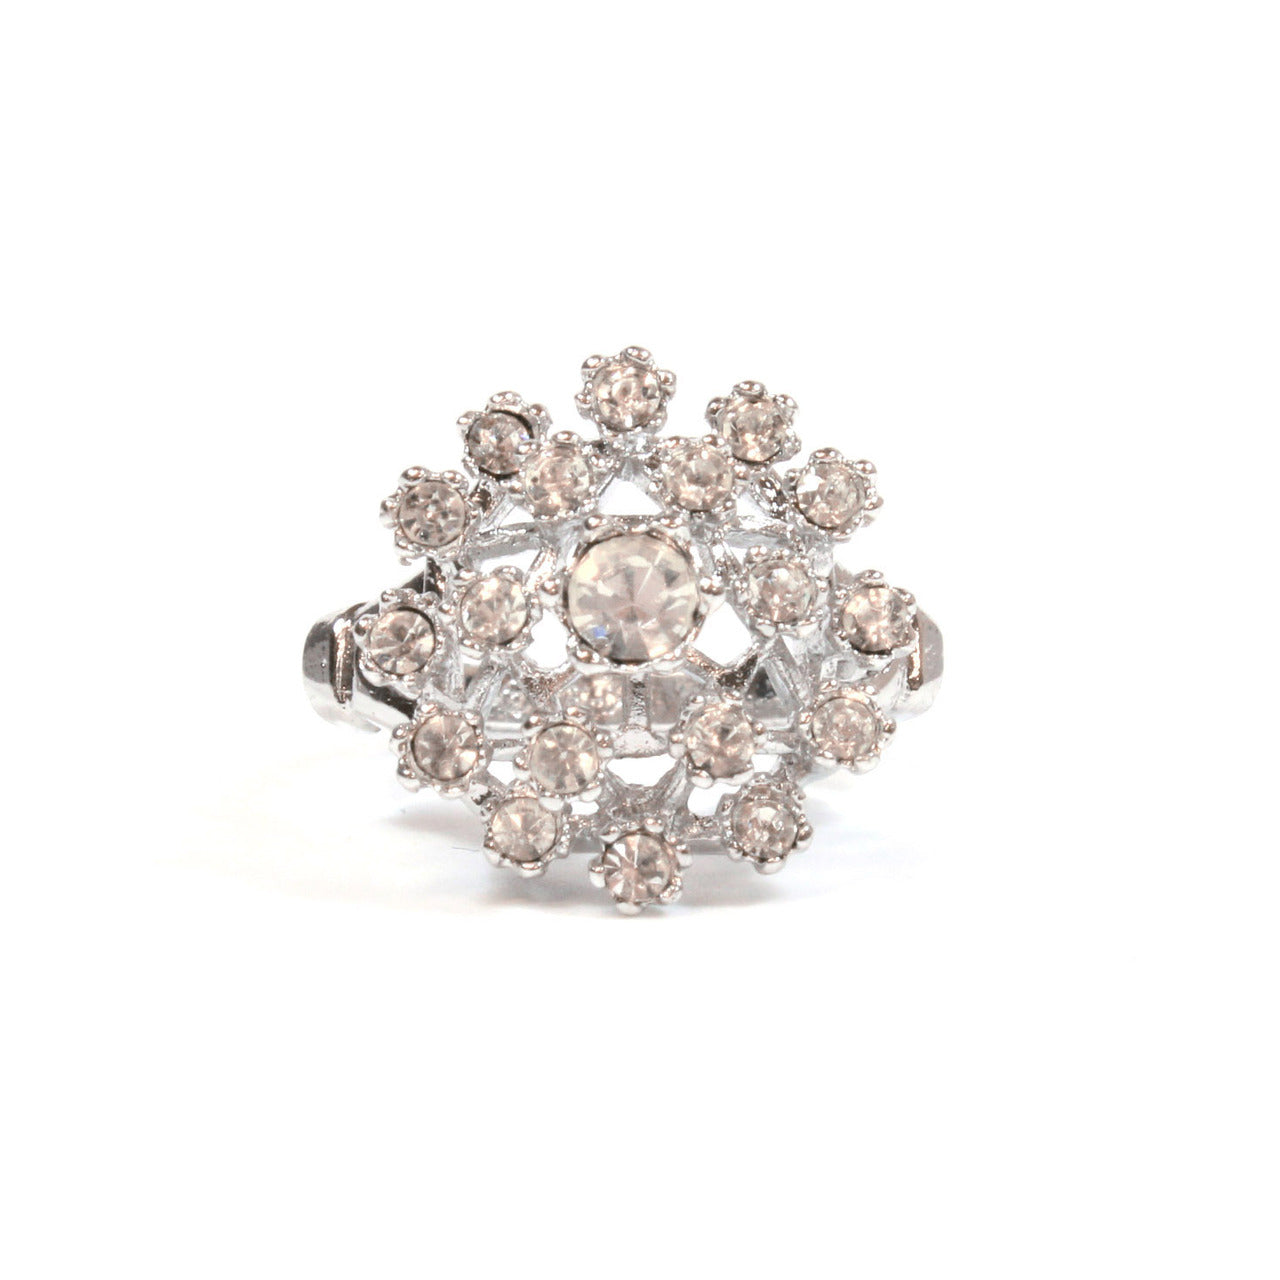 Vintage Clear Austrian Crystal Burst Ring - 18k White Gold Electroplated - April Birthstone - Made in USA